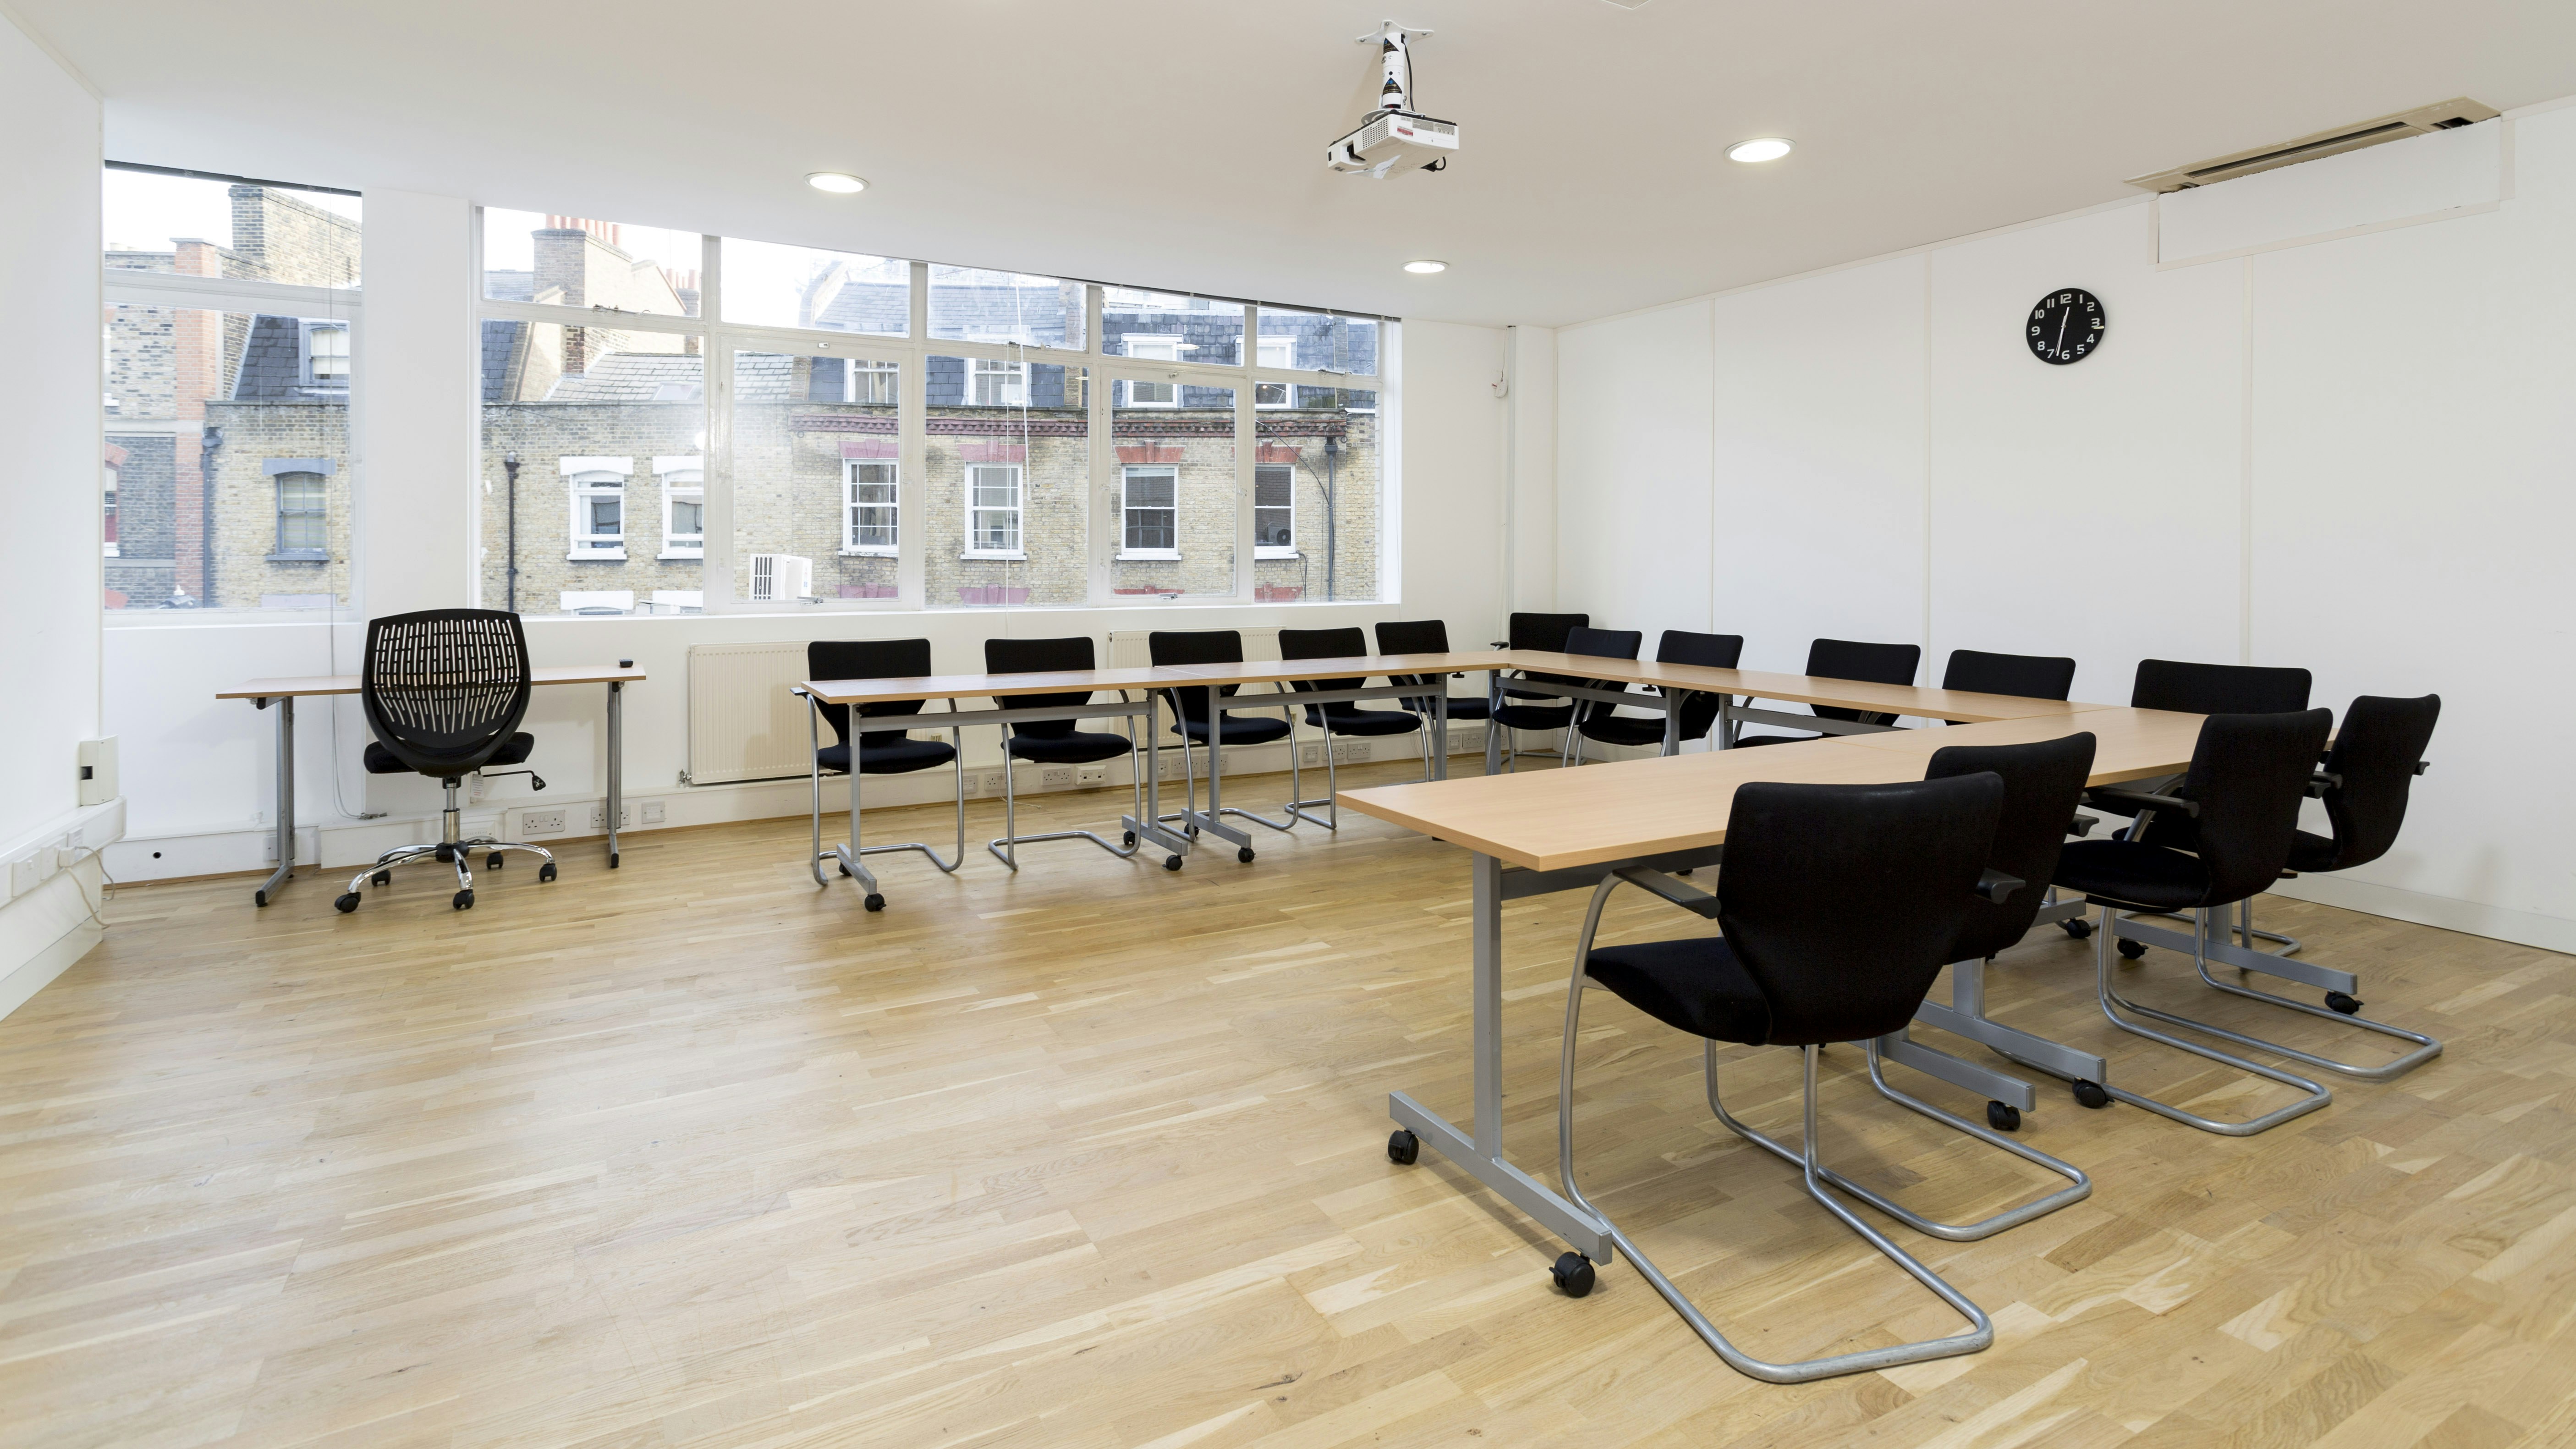 Meeting Rooms in North London - The Training Room Hire Company - Business in Conference / Meeting Room (Large) - Banner